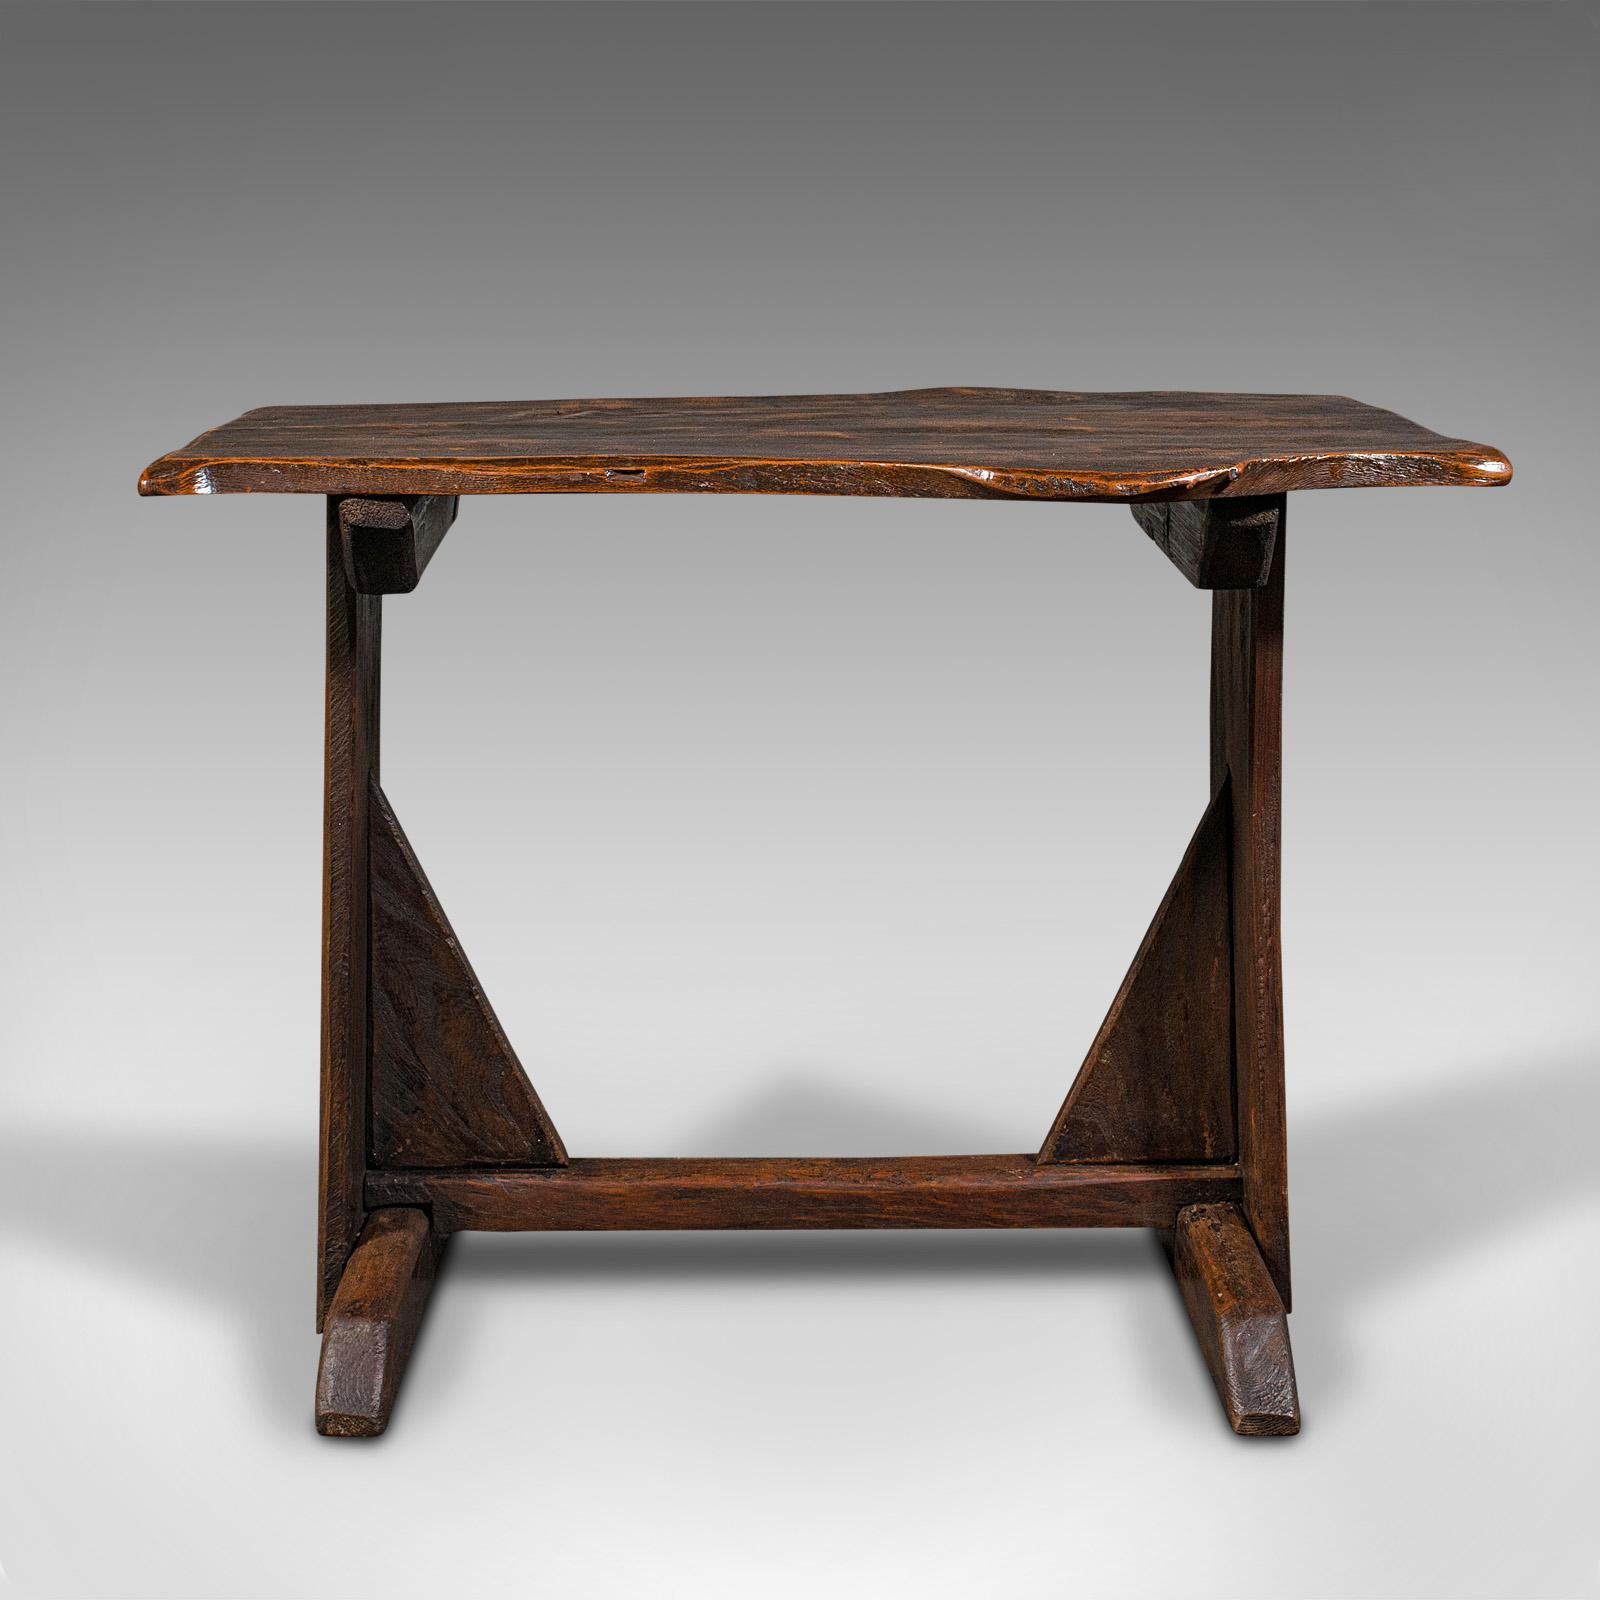 This is an antique tavern table. An English, oak occasional or side table with live waney edge, dating to the Georgian period, circa 1800.

Captivating antique table, with copious character
Displays a desirable aged patina and weathering
Select